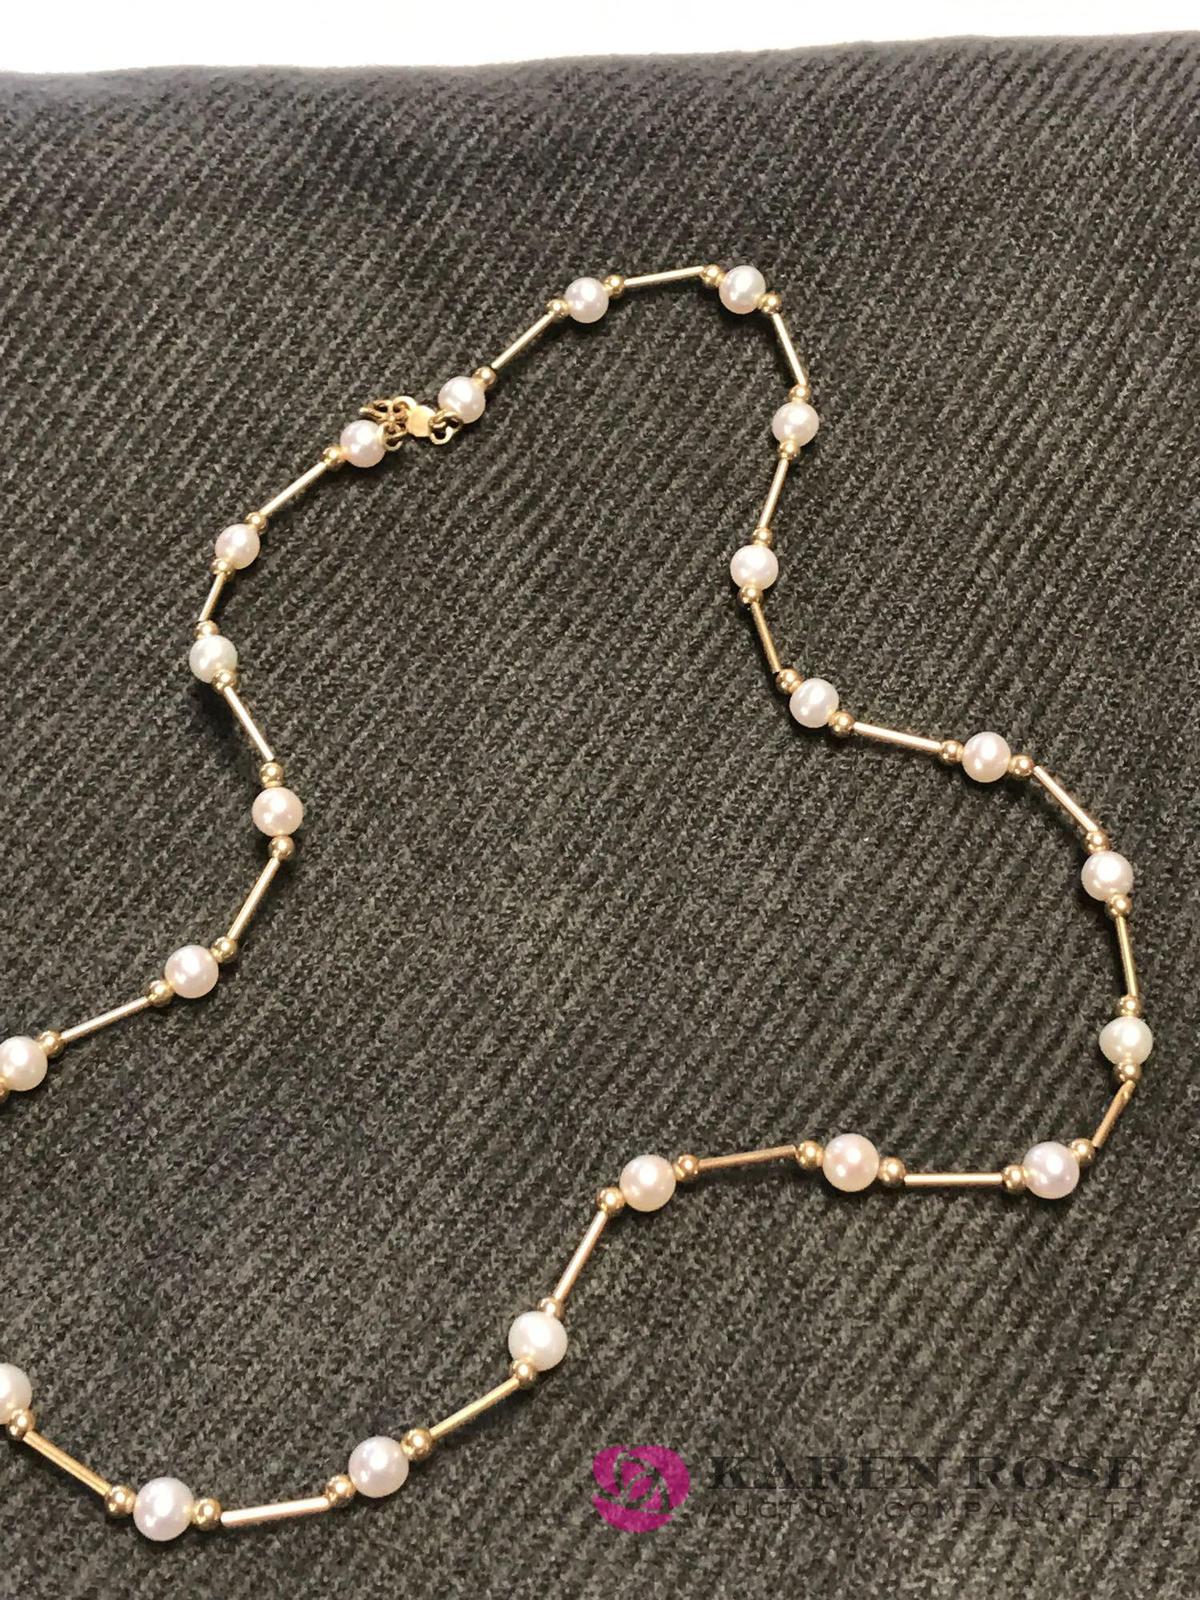 14 kt Cultured Pearl necklace 6.0 grams